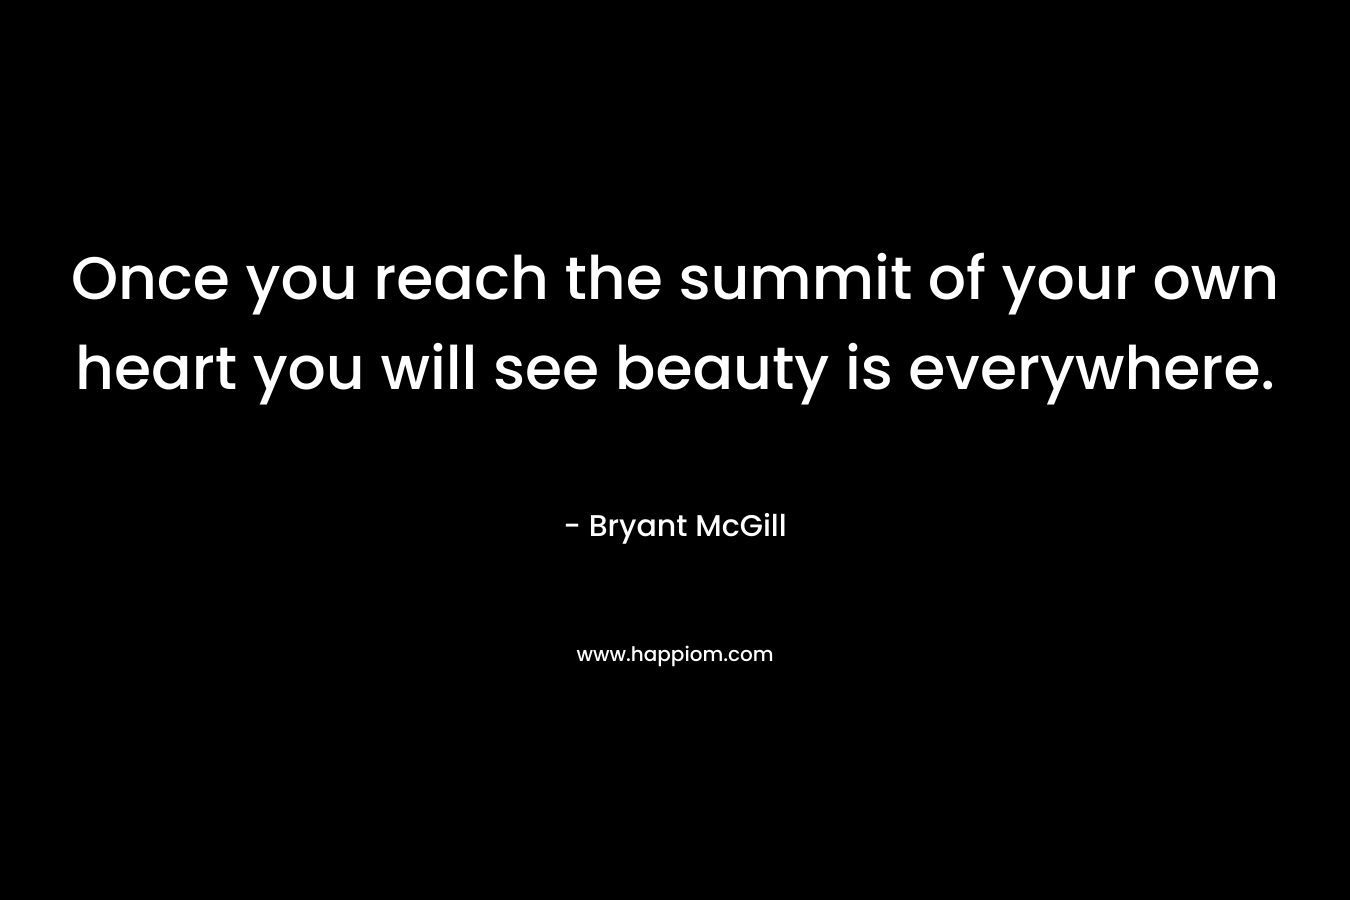 Once you reach the summit of your own heart you will see beauty is everywhere. – Bryant McGill